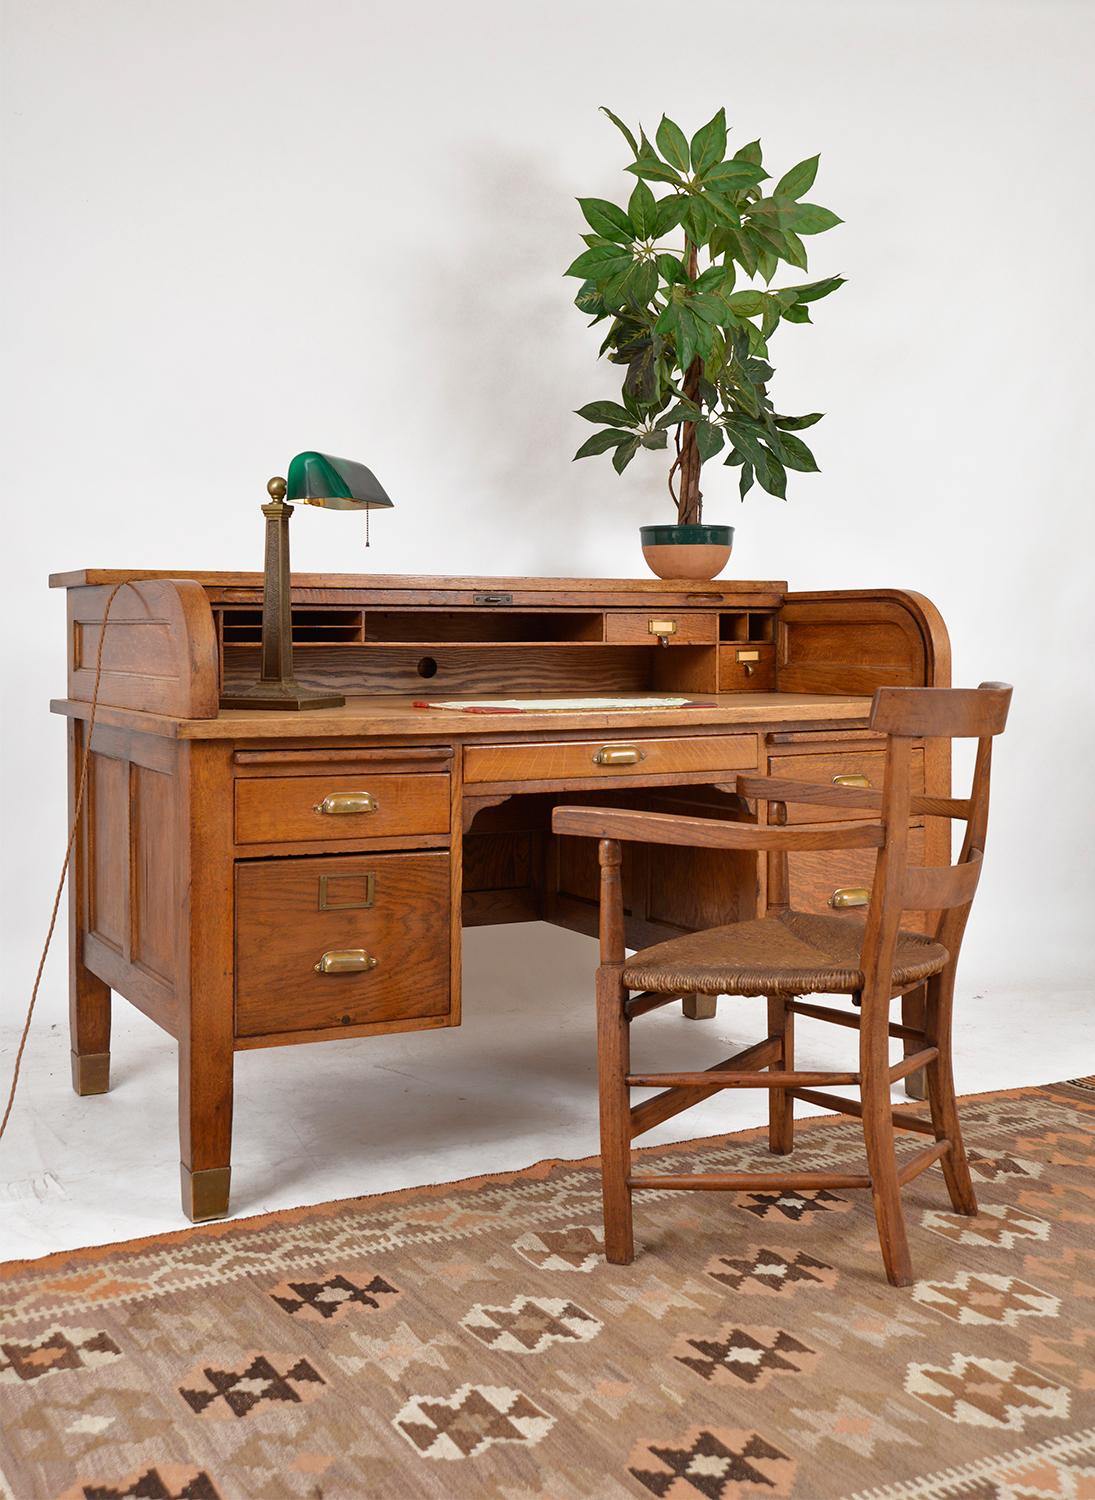 British 1920s English Antique Oak Desk D Shaped Tambour Roll Top Library Home Office